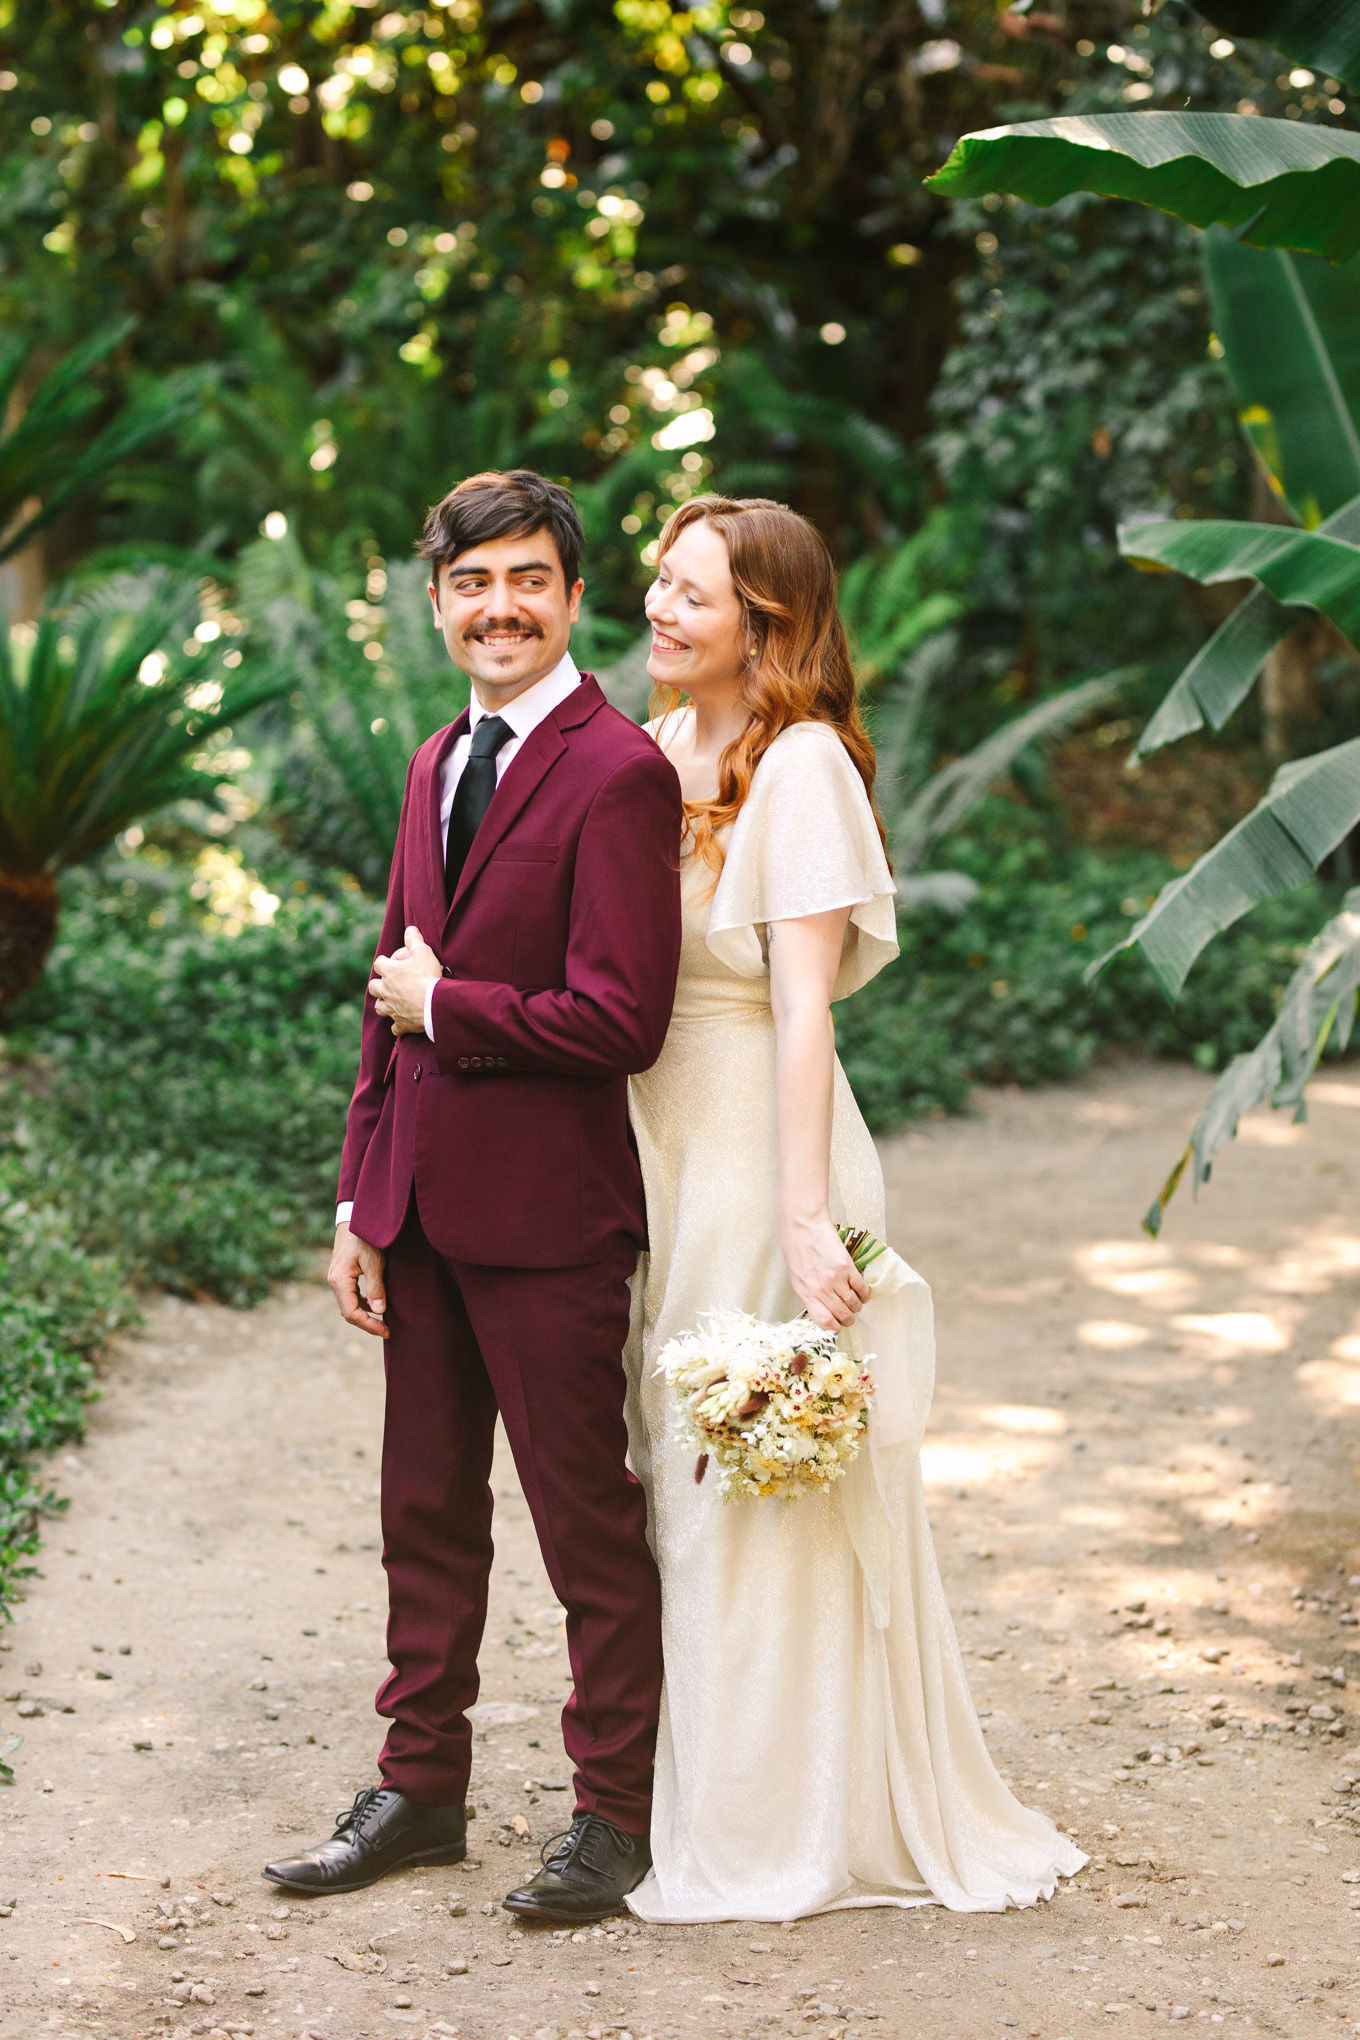 Bride and groom in LA Arboretum | Best Southern California Garden Wedding Venues | Colorful and elevated wedding photography for fun-loving couples | #gardenvenue #weddingvenue #socalweddingvenue #bouquetideas #uniquebouquet   Source: Mary Costa Photography | Los Angeles 